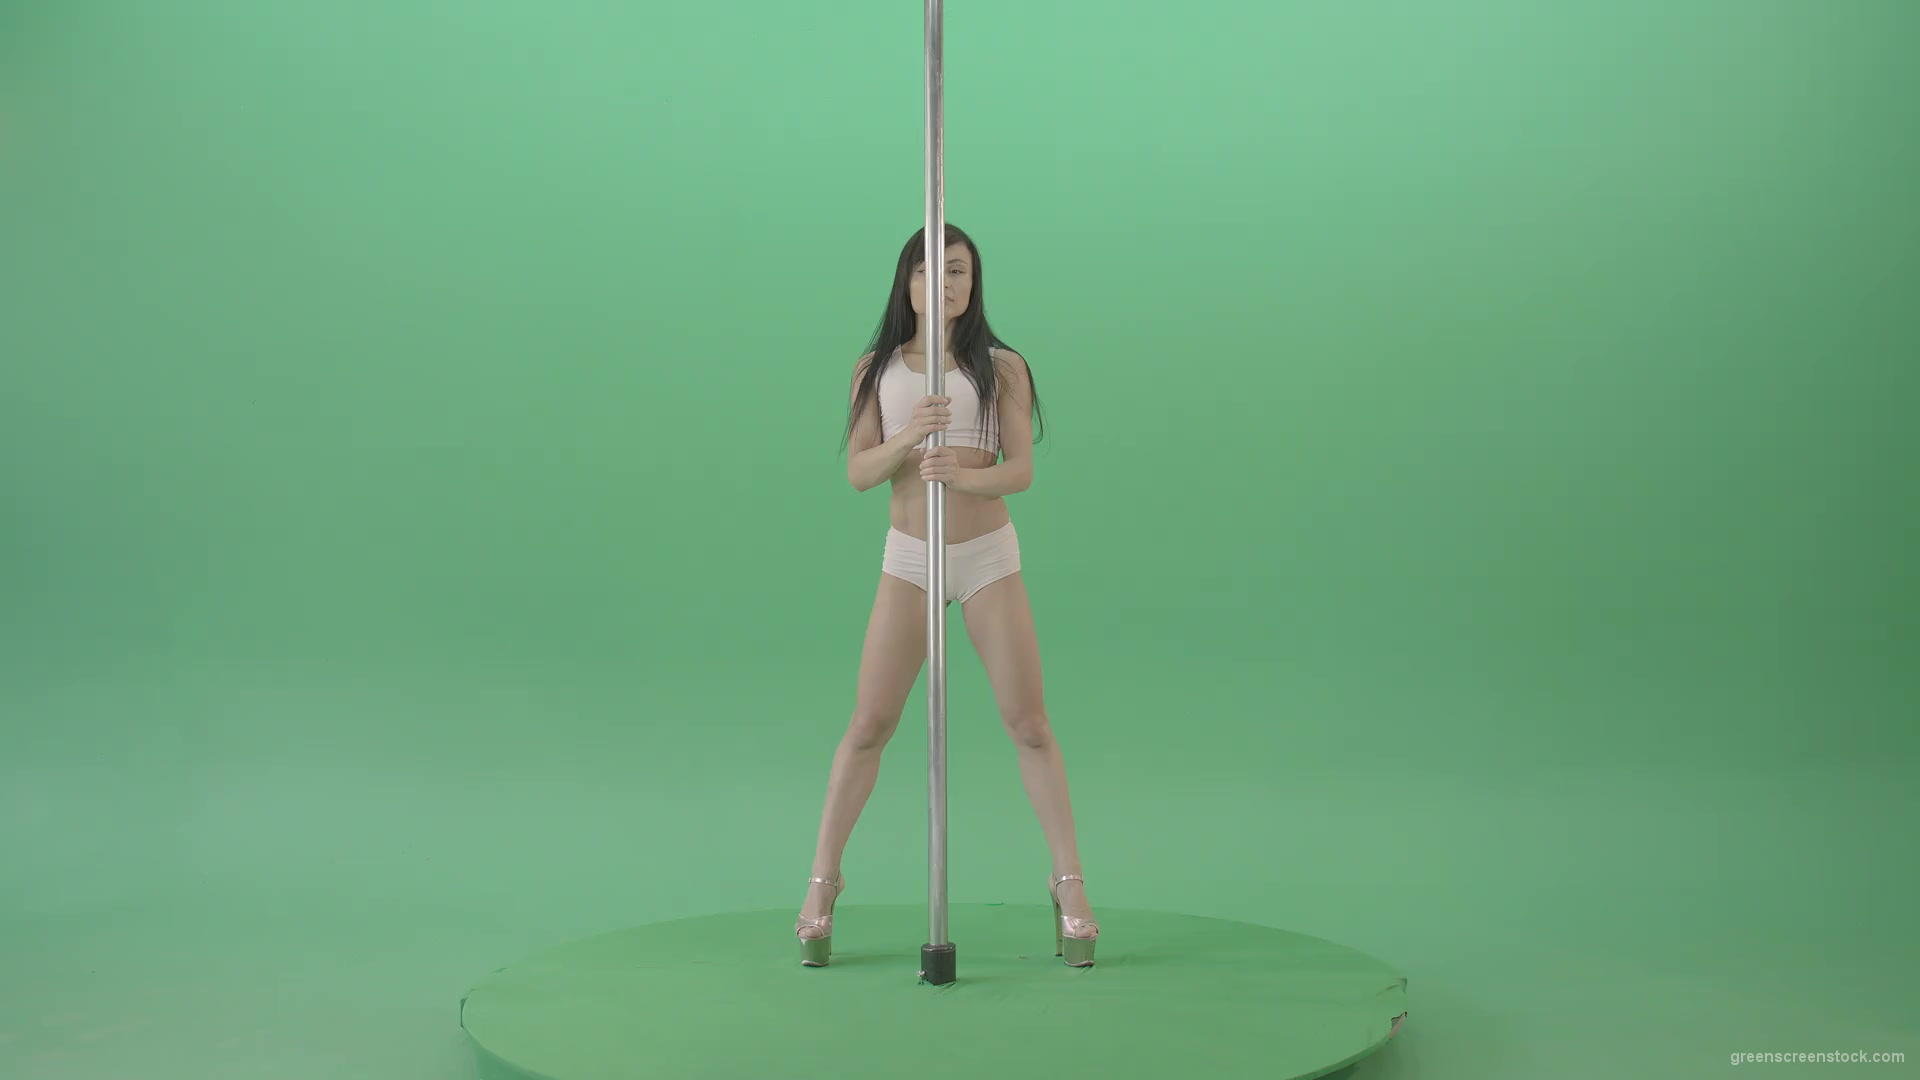 Pole-Dance-sport-girl-waving-sexy-body-isolated-on-green-screen-4K-Video-Footage-1920_001 Green Screen Stock